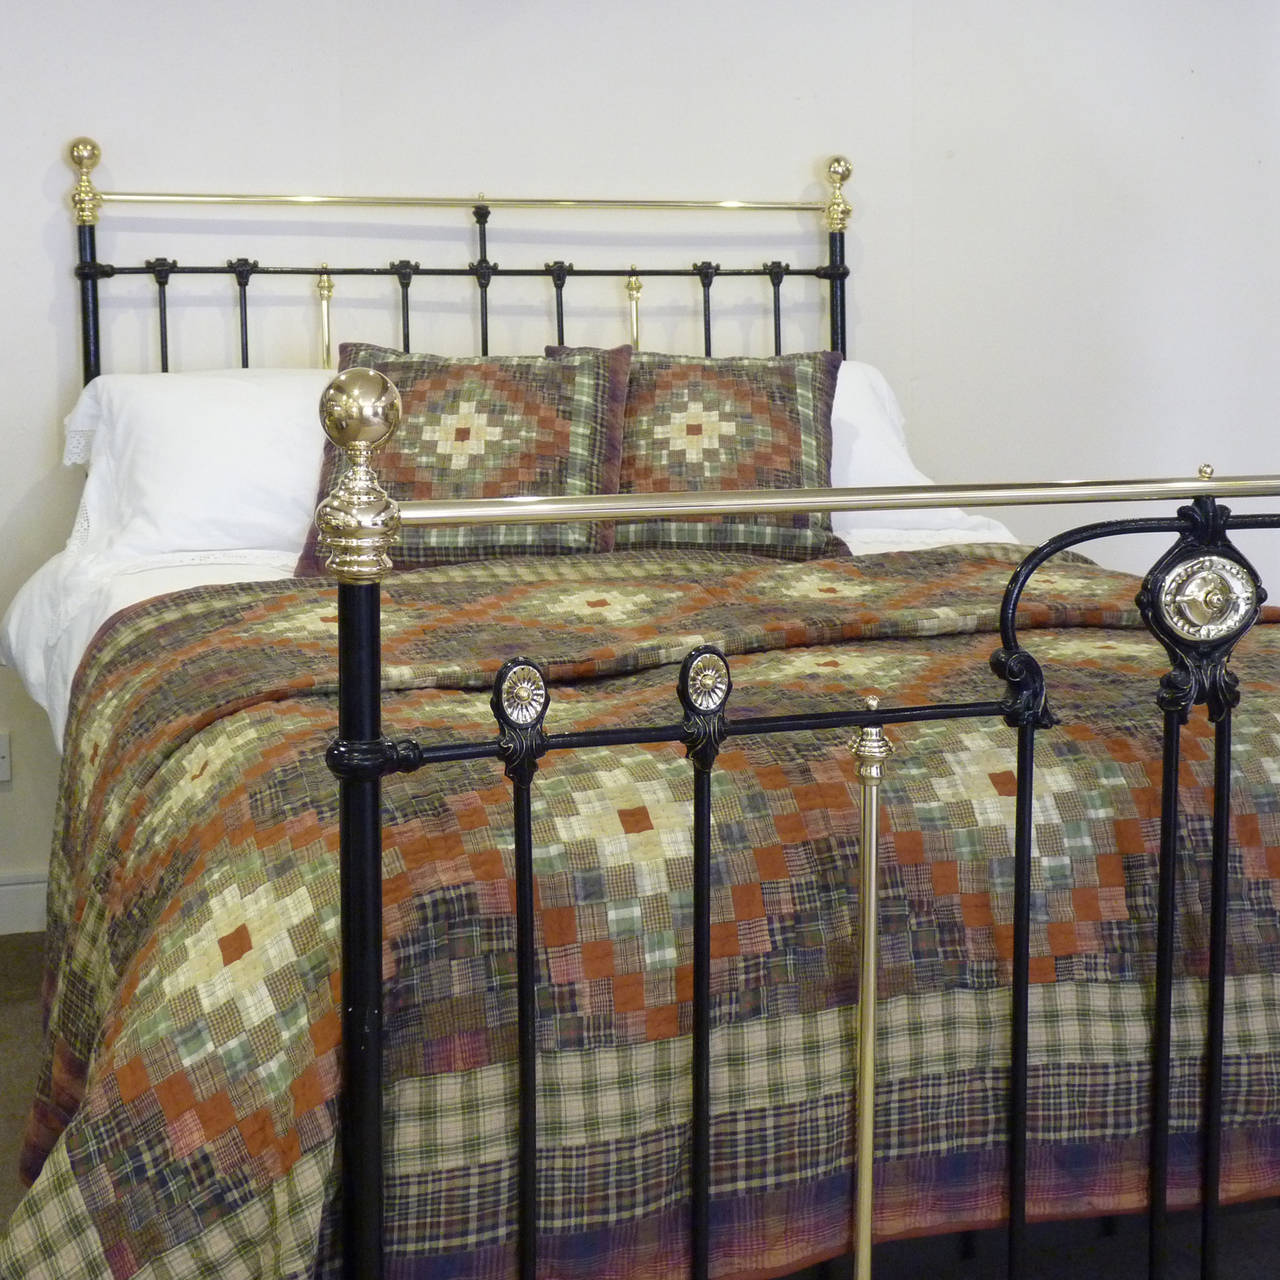 This fine bedstead finished in black has Art Nouveau style design in the foot board with large central rosette, decorative mouldings and smaller rosettes, which stand proud of the castings.
The castings in the head and foot panels have faded gold